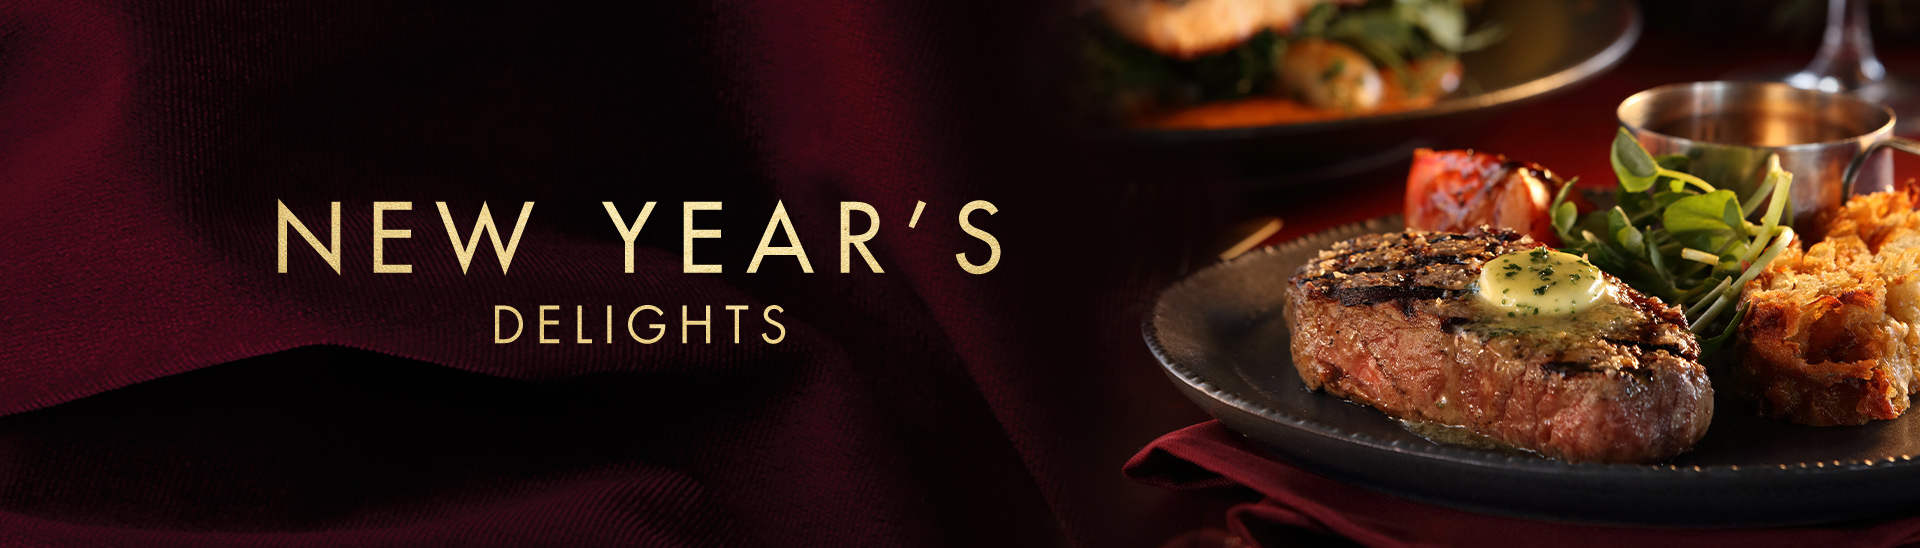 New Year’s Eve 2019 at Miller & Carter Cheshire